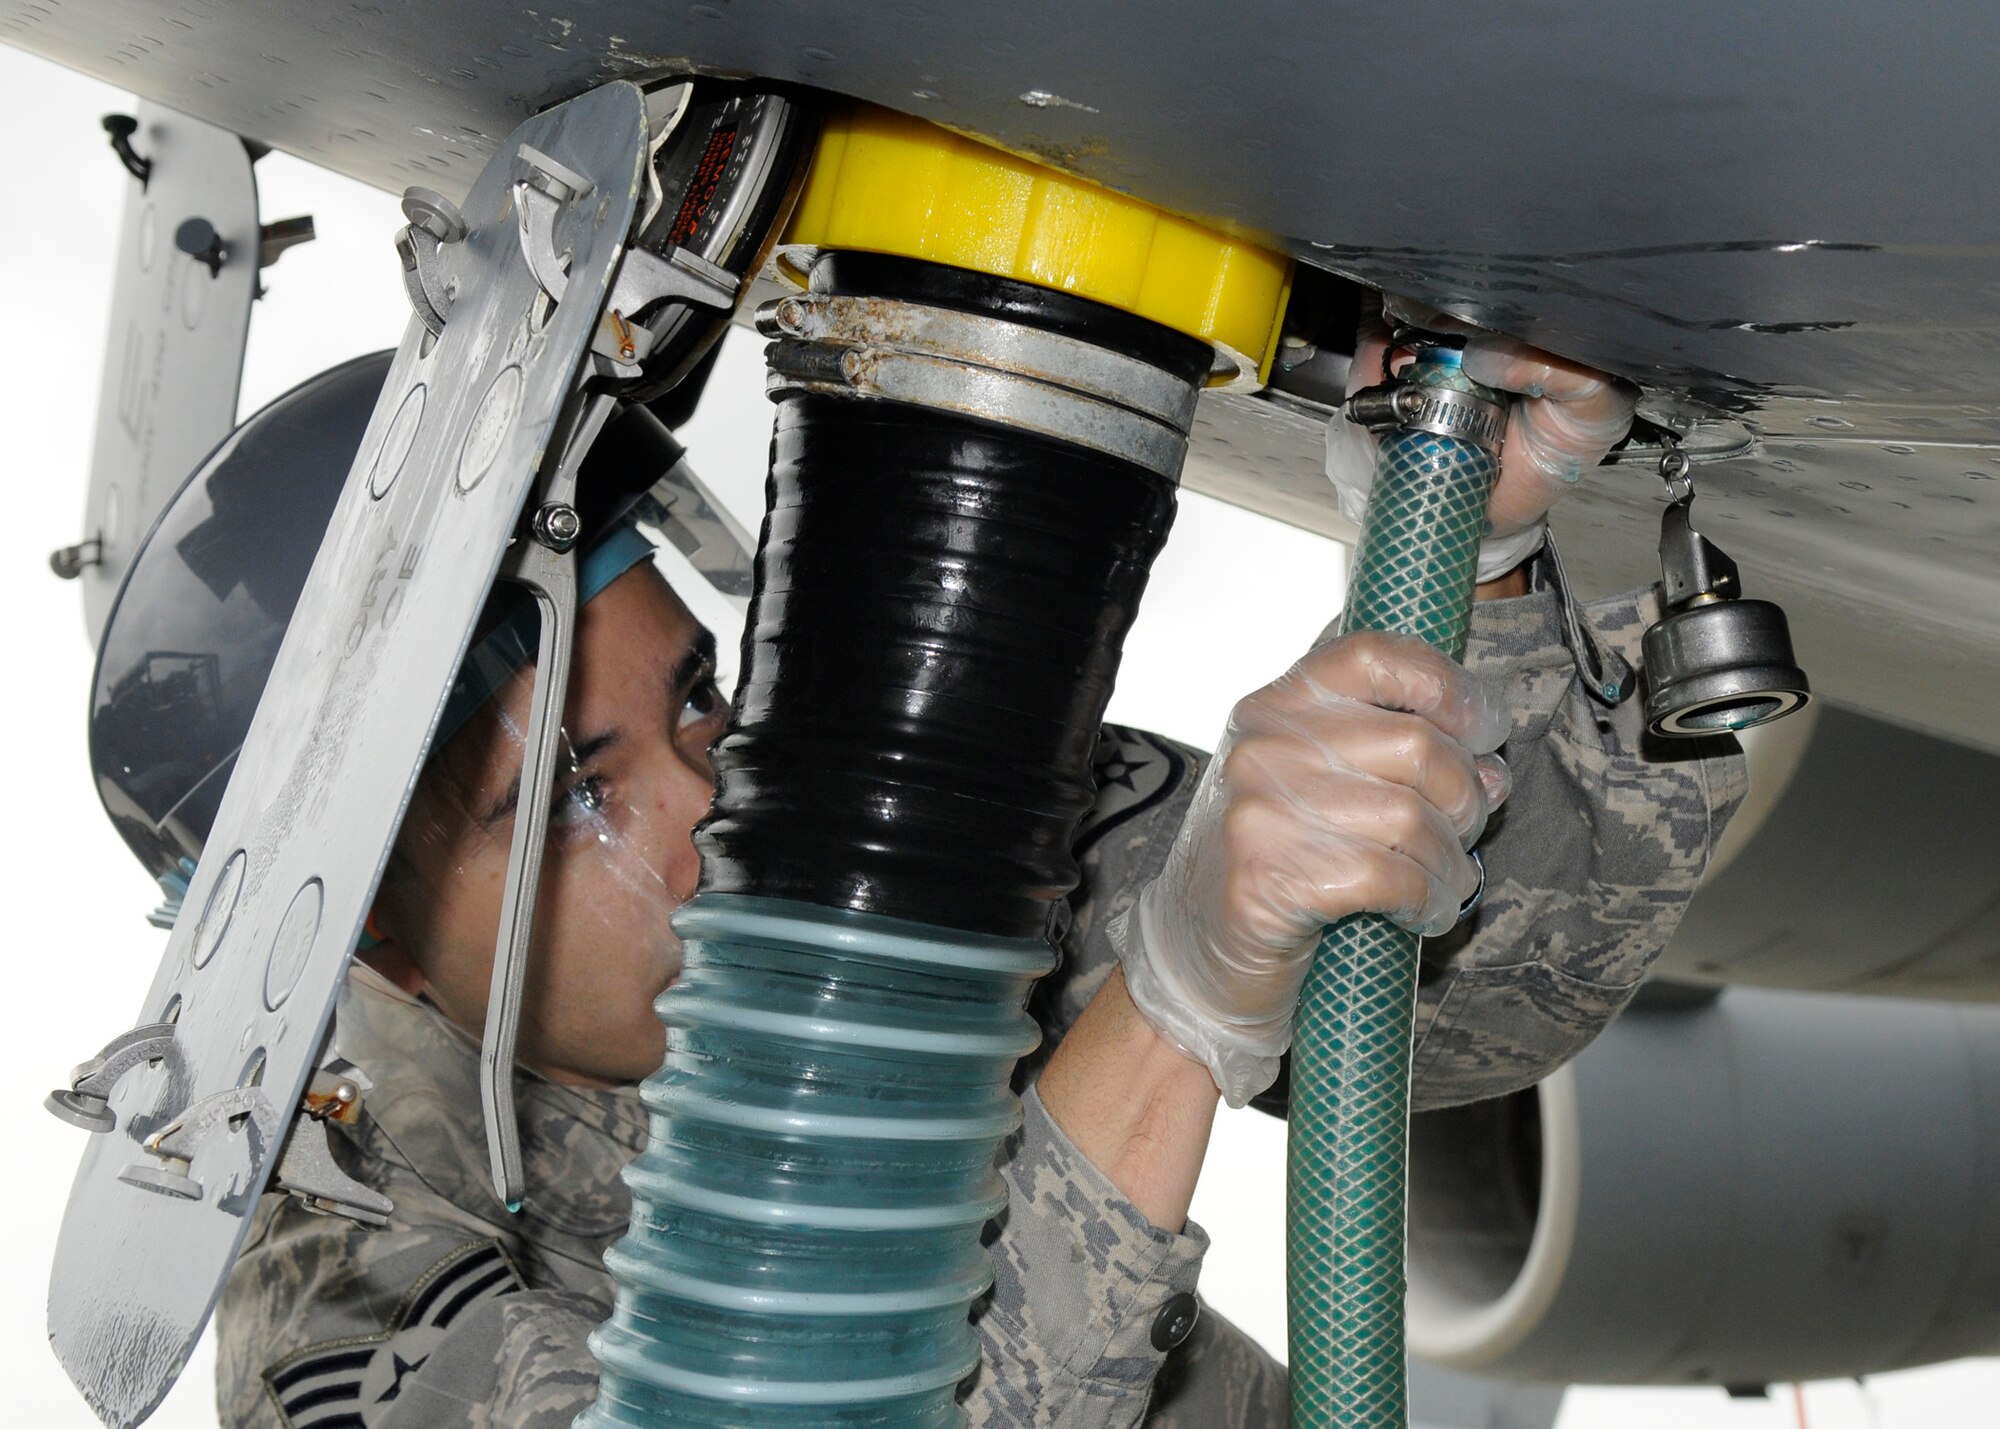 SPANGDAHLEM AIR BASE, Germany – Staff Sgt. Jesus Macias, 726th Aircraft Mobility Squadron air transportation journeyman, connects the cryotech, an aircraft lavatory fluid, hose during a routine latrine service on a C-17 Globemaster Aug 13. (U.S. Air Force photo by Airman 1st Class Staci Miller)